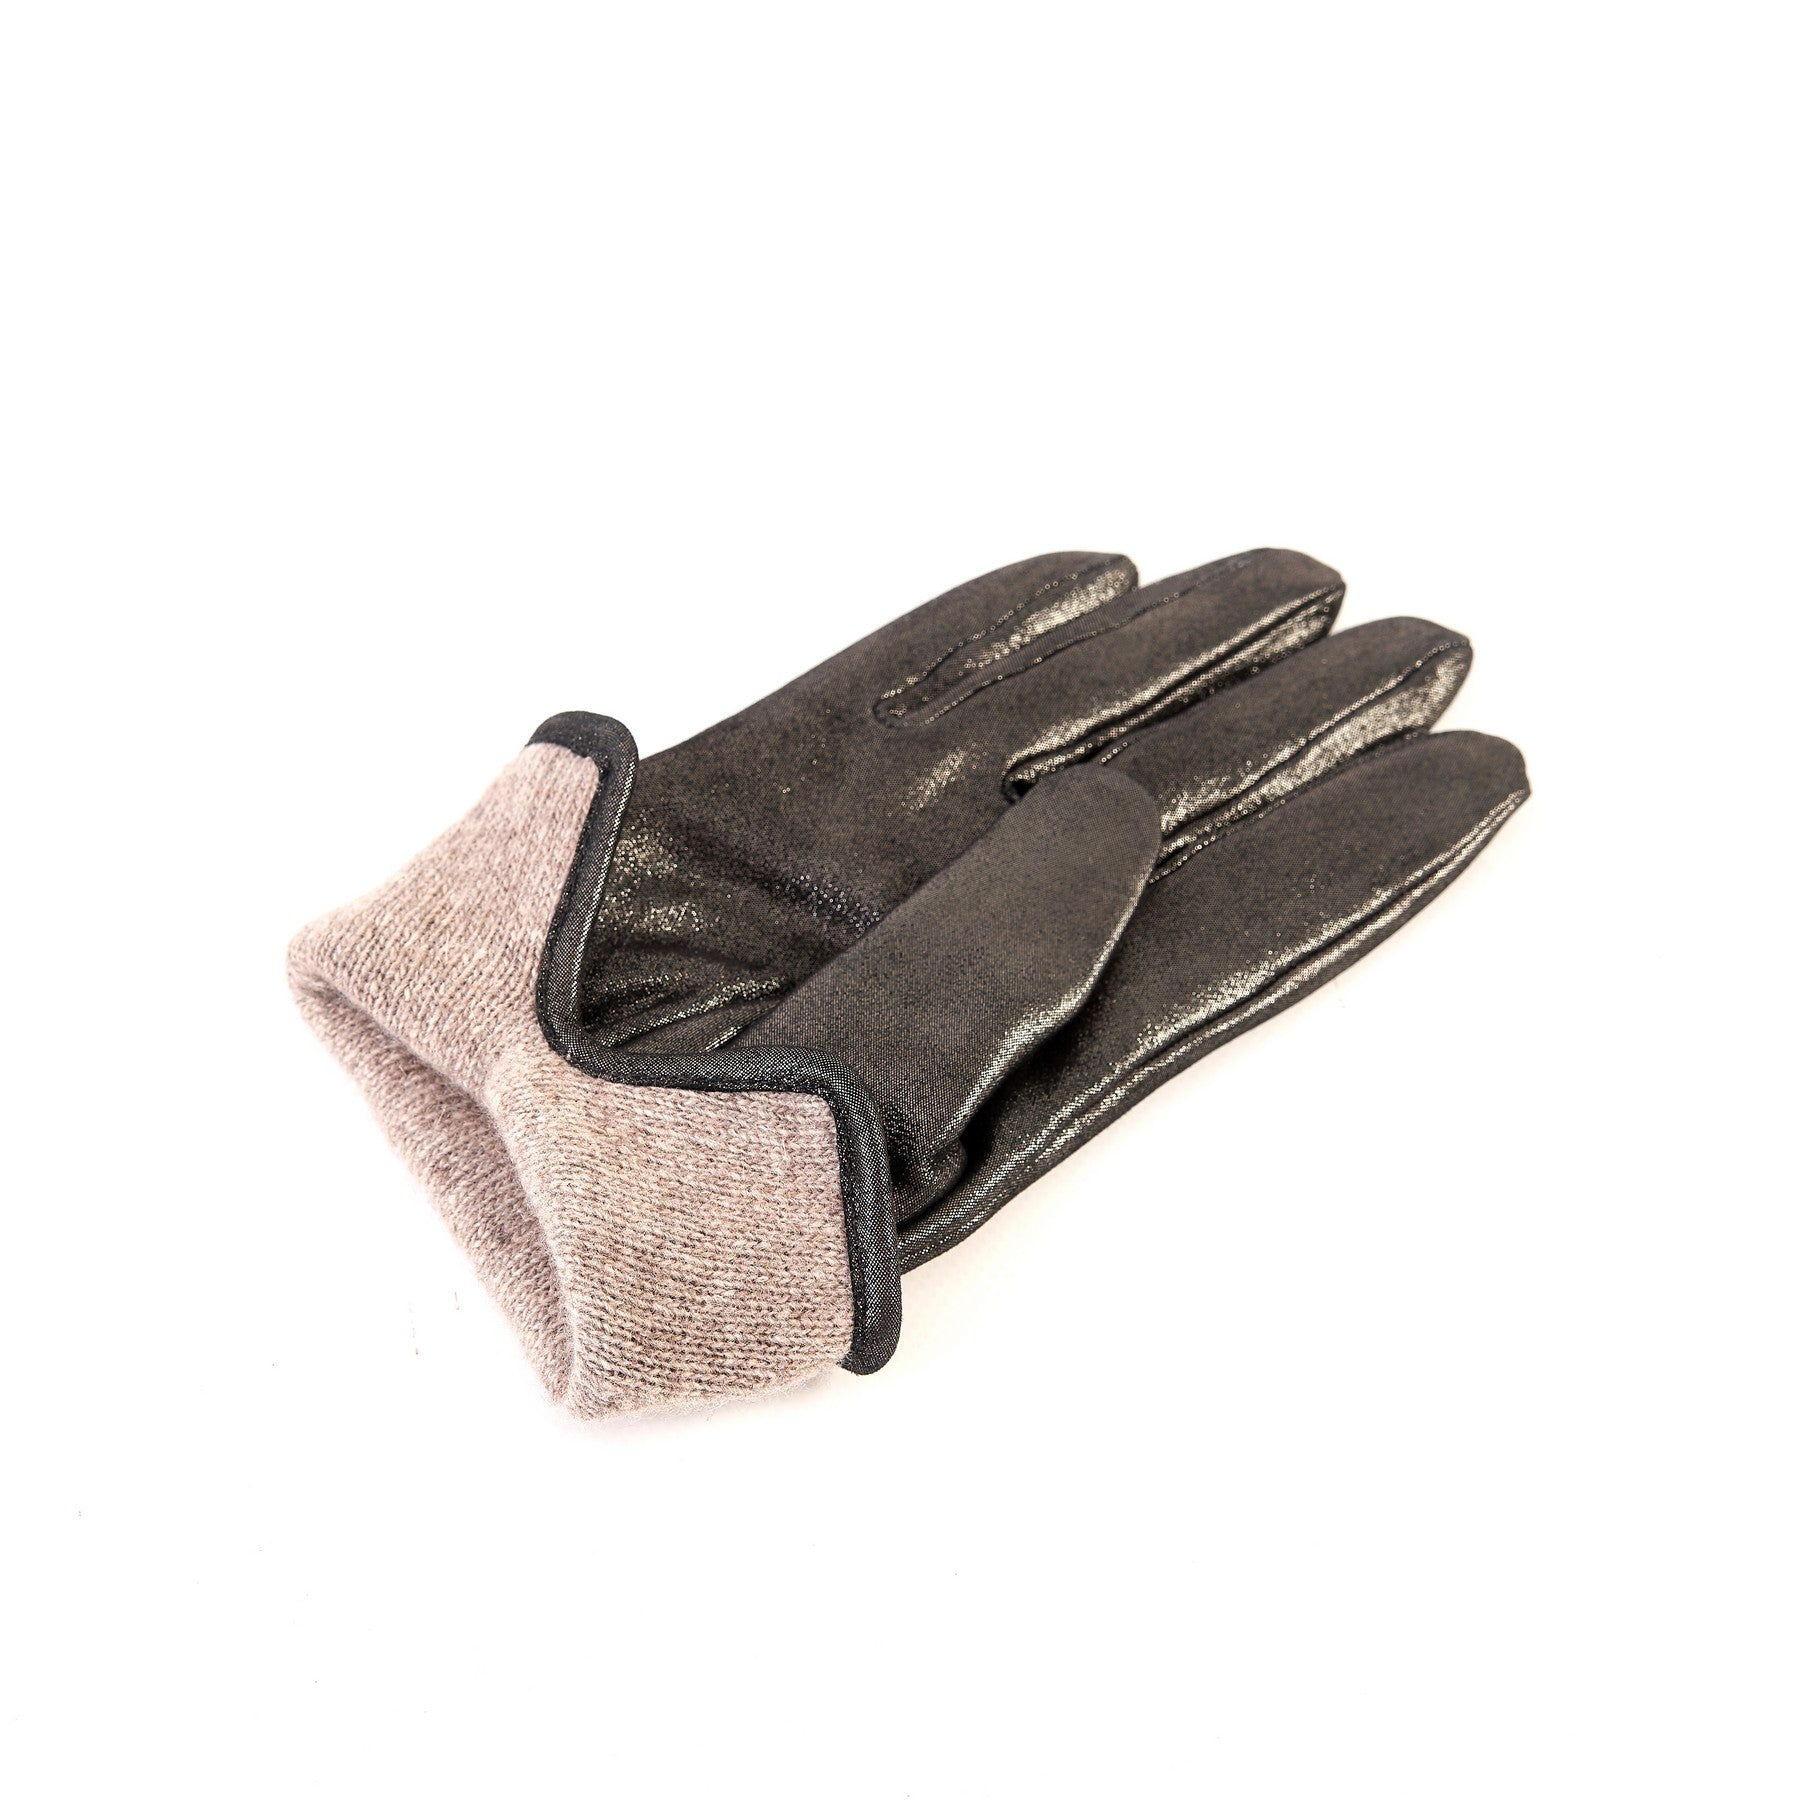 Women’s basic grey soft laminated suede leather gloves with palm opening and mix cashmere lining